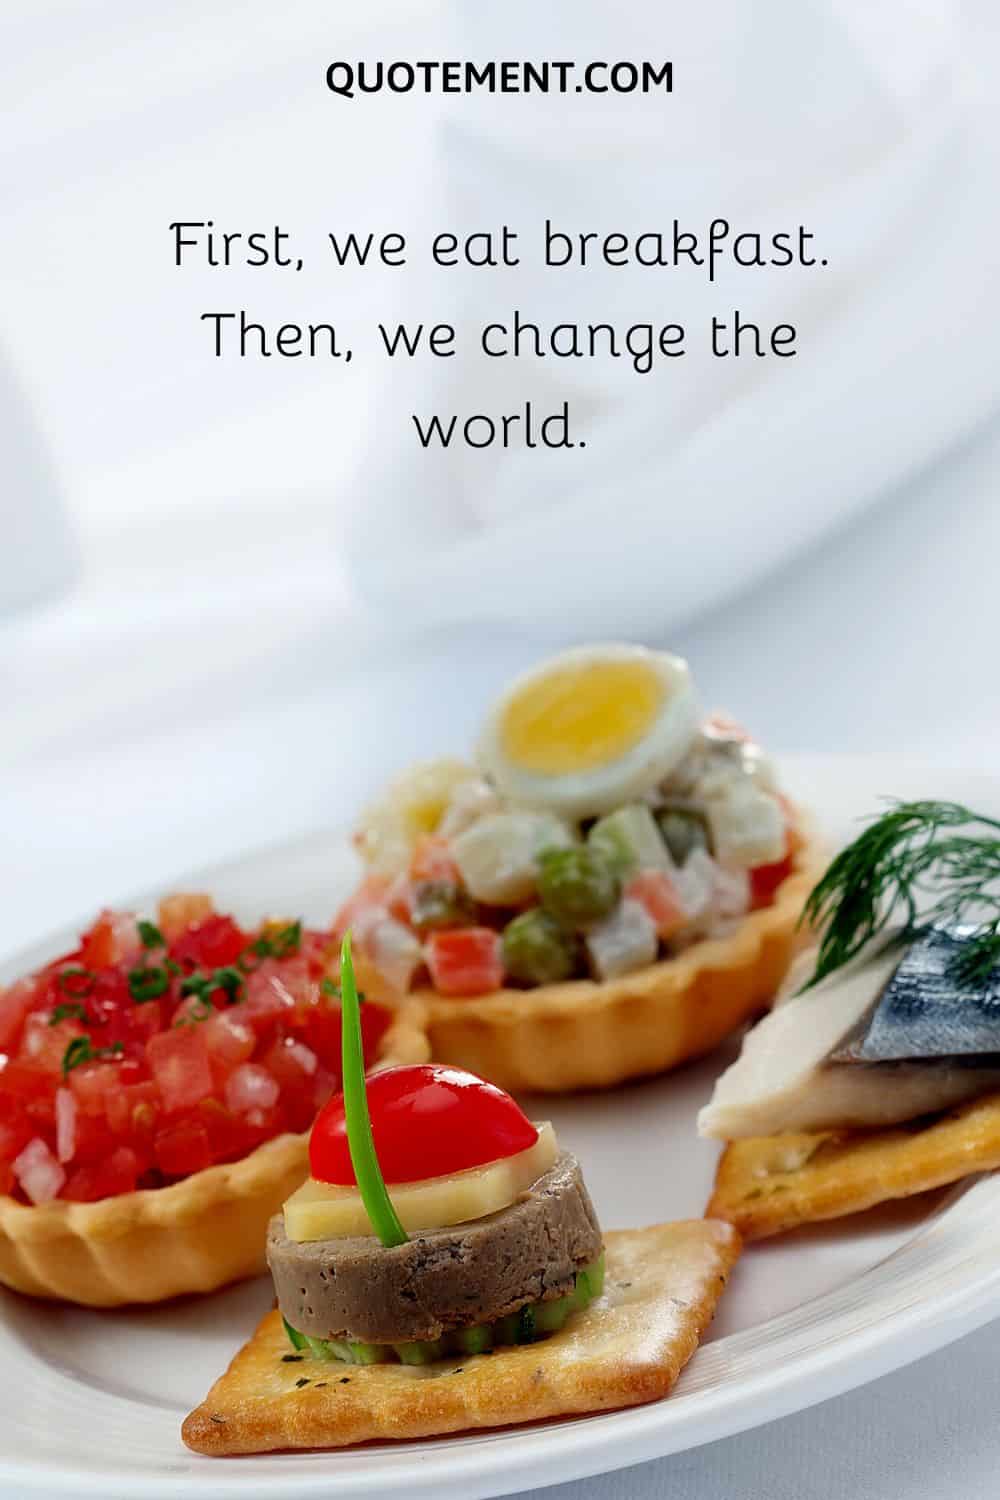 First, we eat breakfast. Then, we change the world.